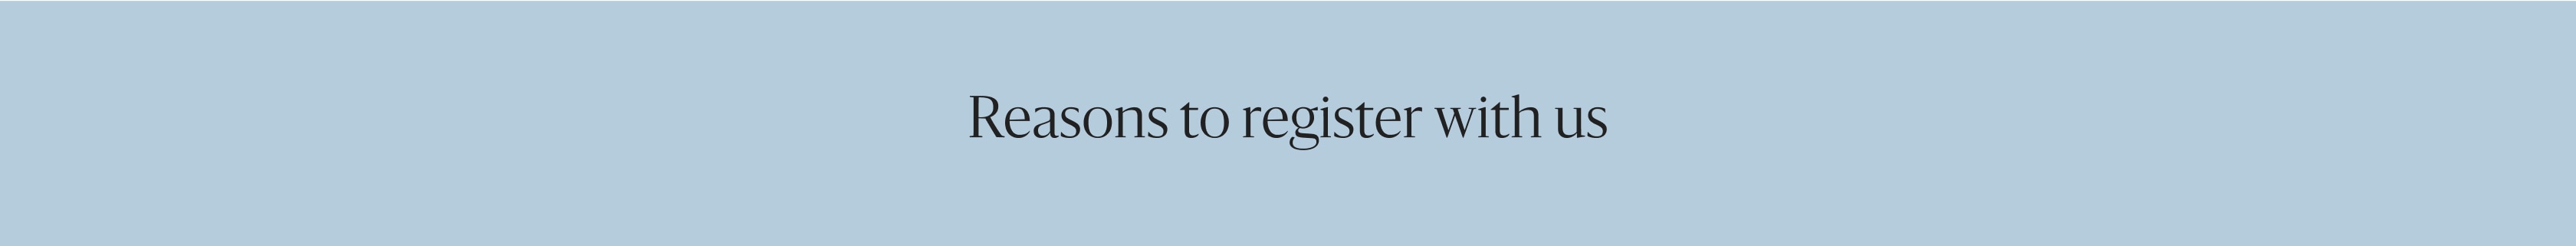 Reasons to register with us.